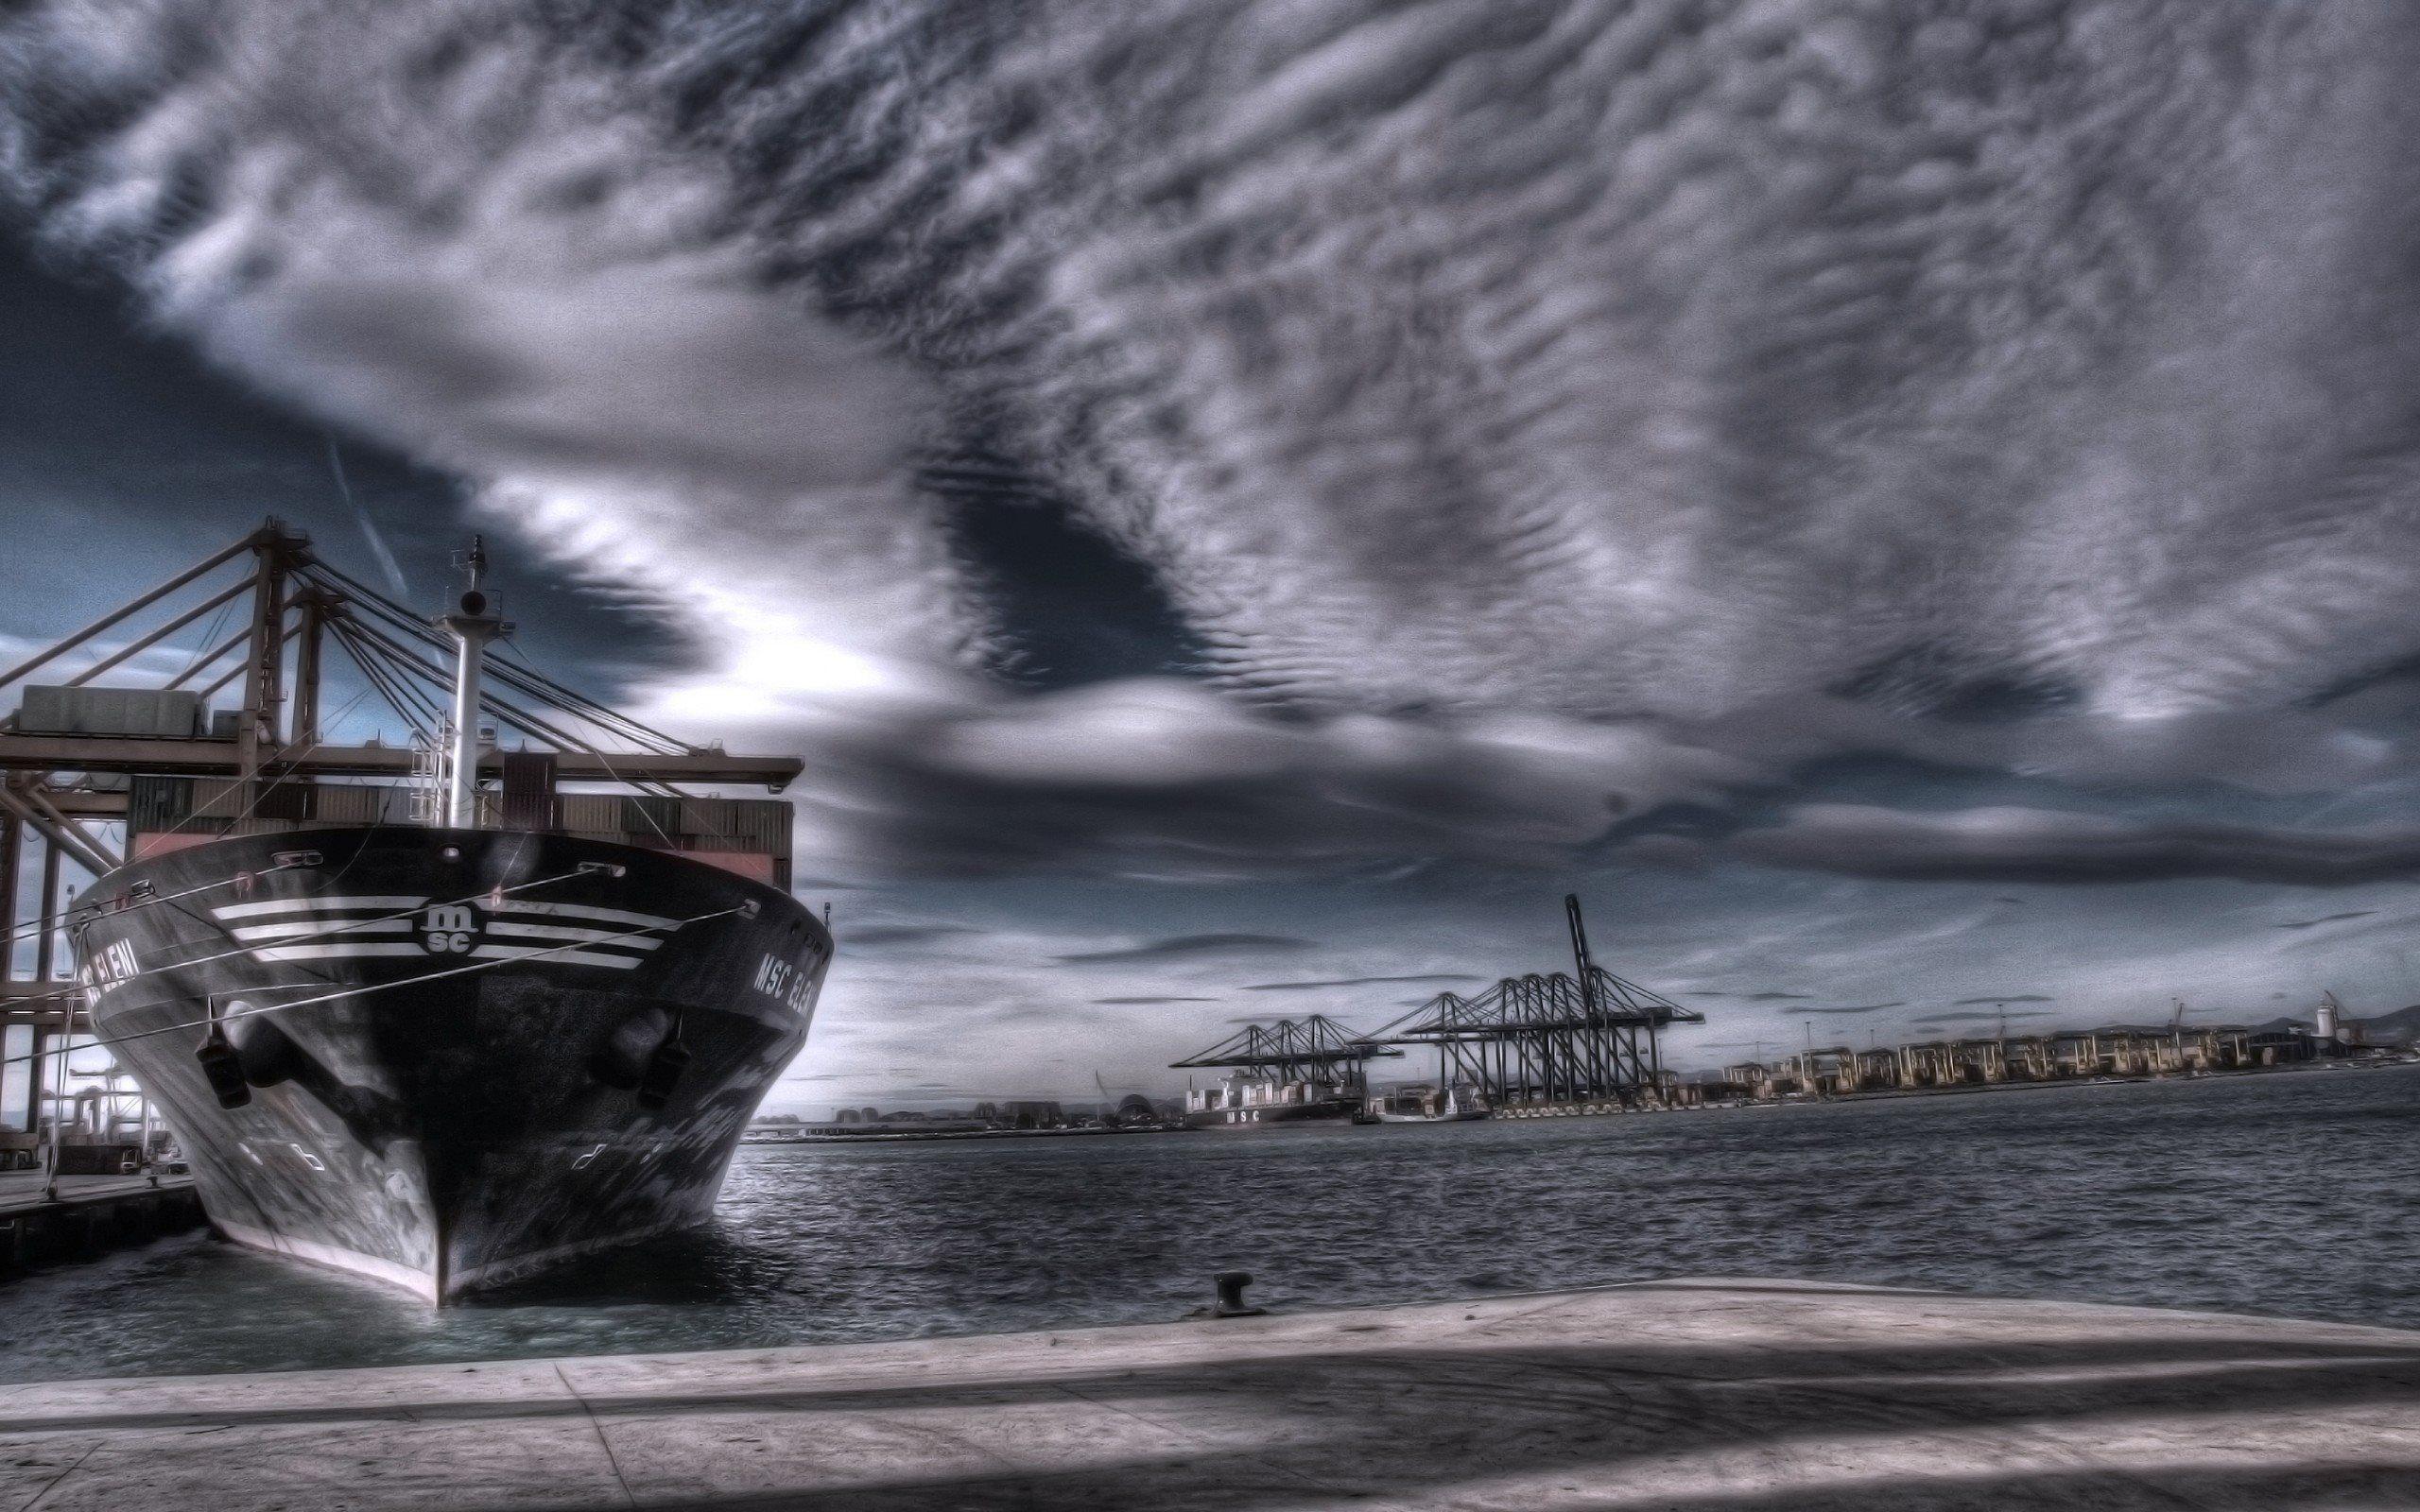 Download wallpaper eleni, msc, a container ship, port, hdr